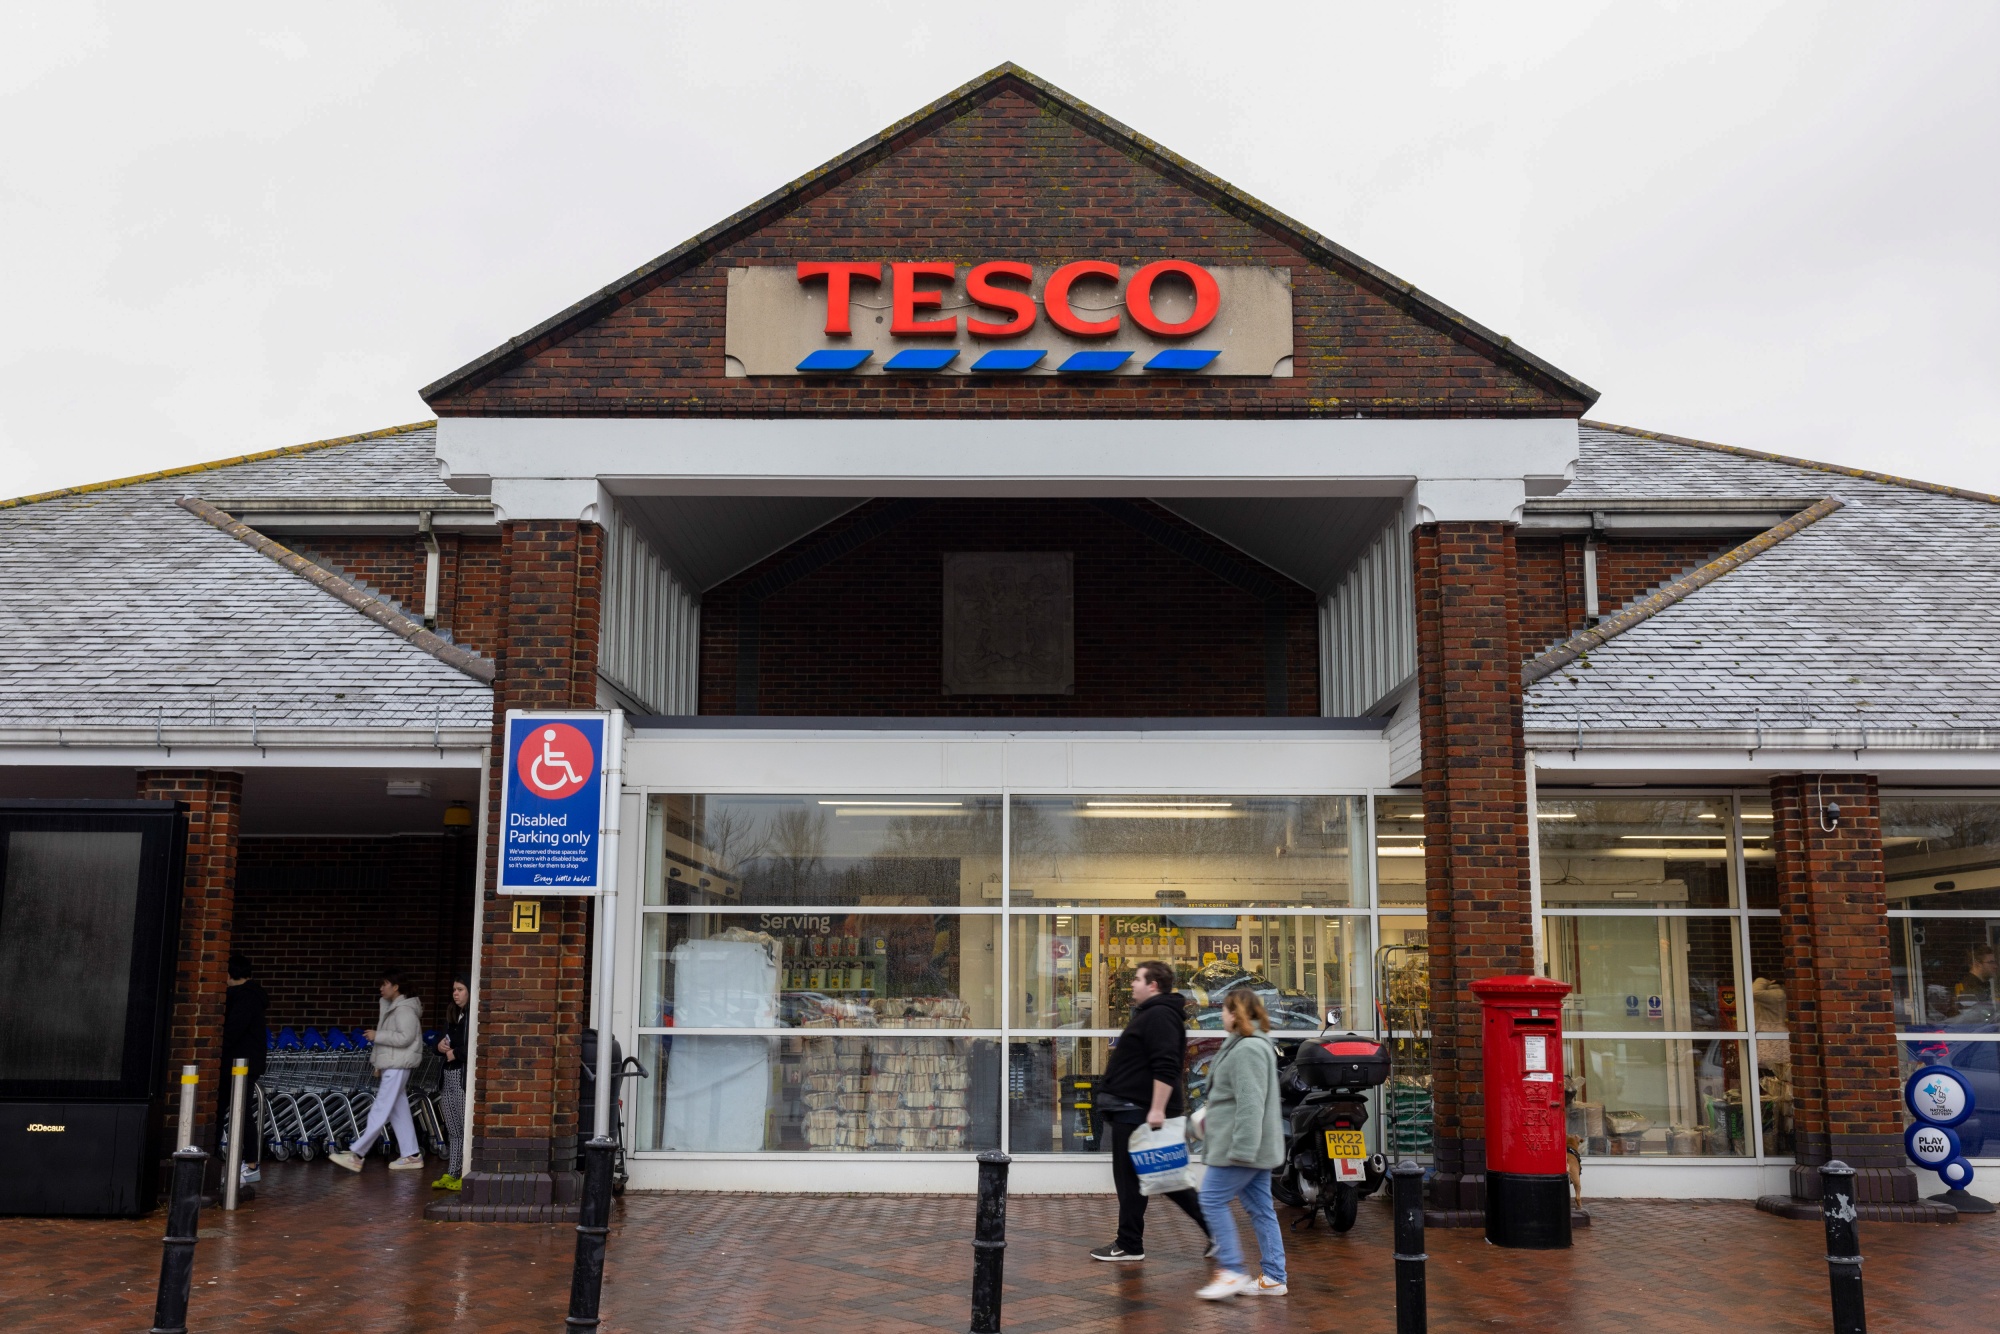 Tesco Appoints Former Aldi Boss as Head of UK Operations - Bloomberg